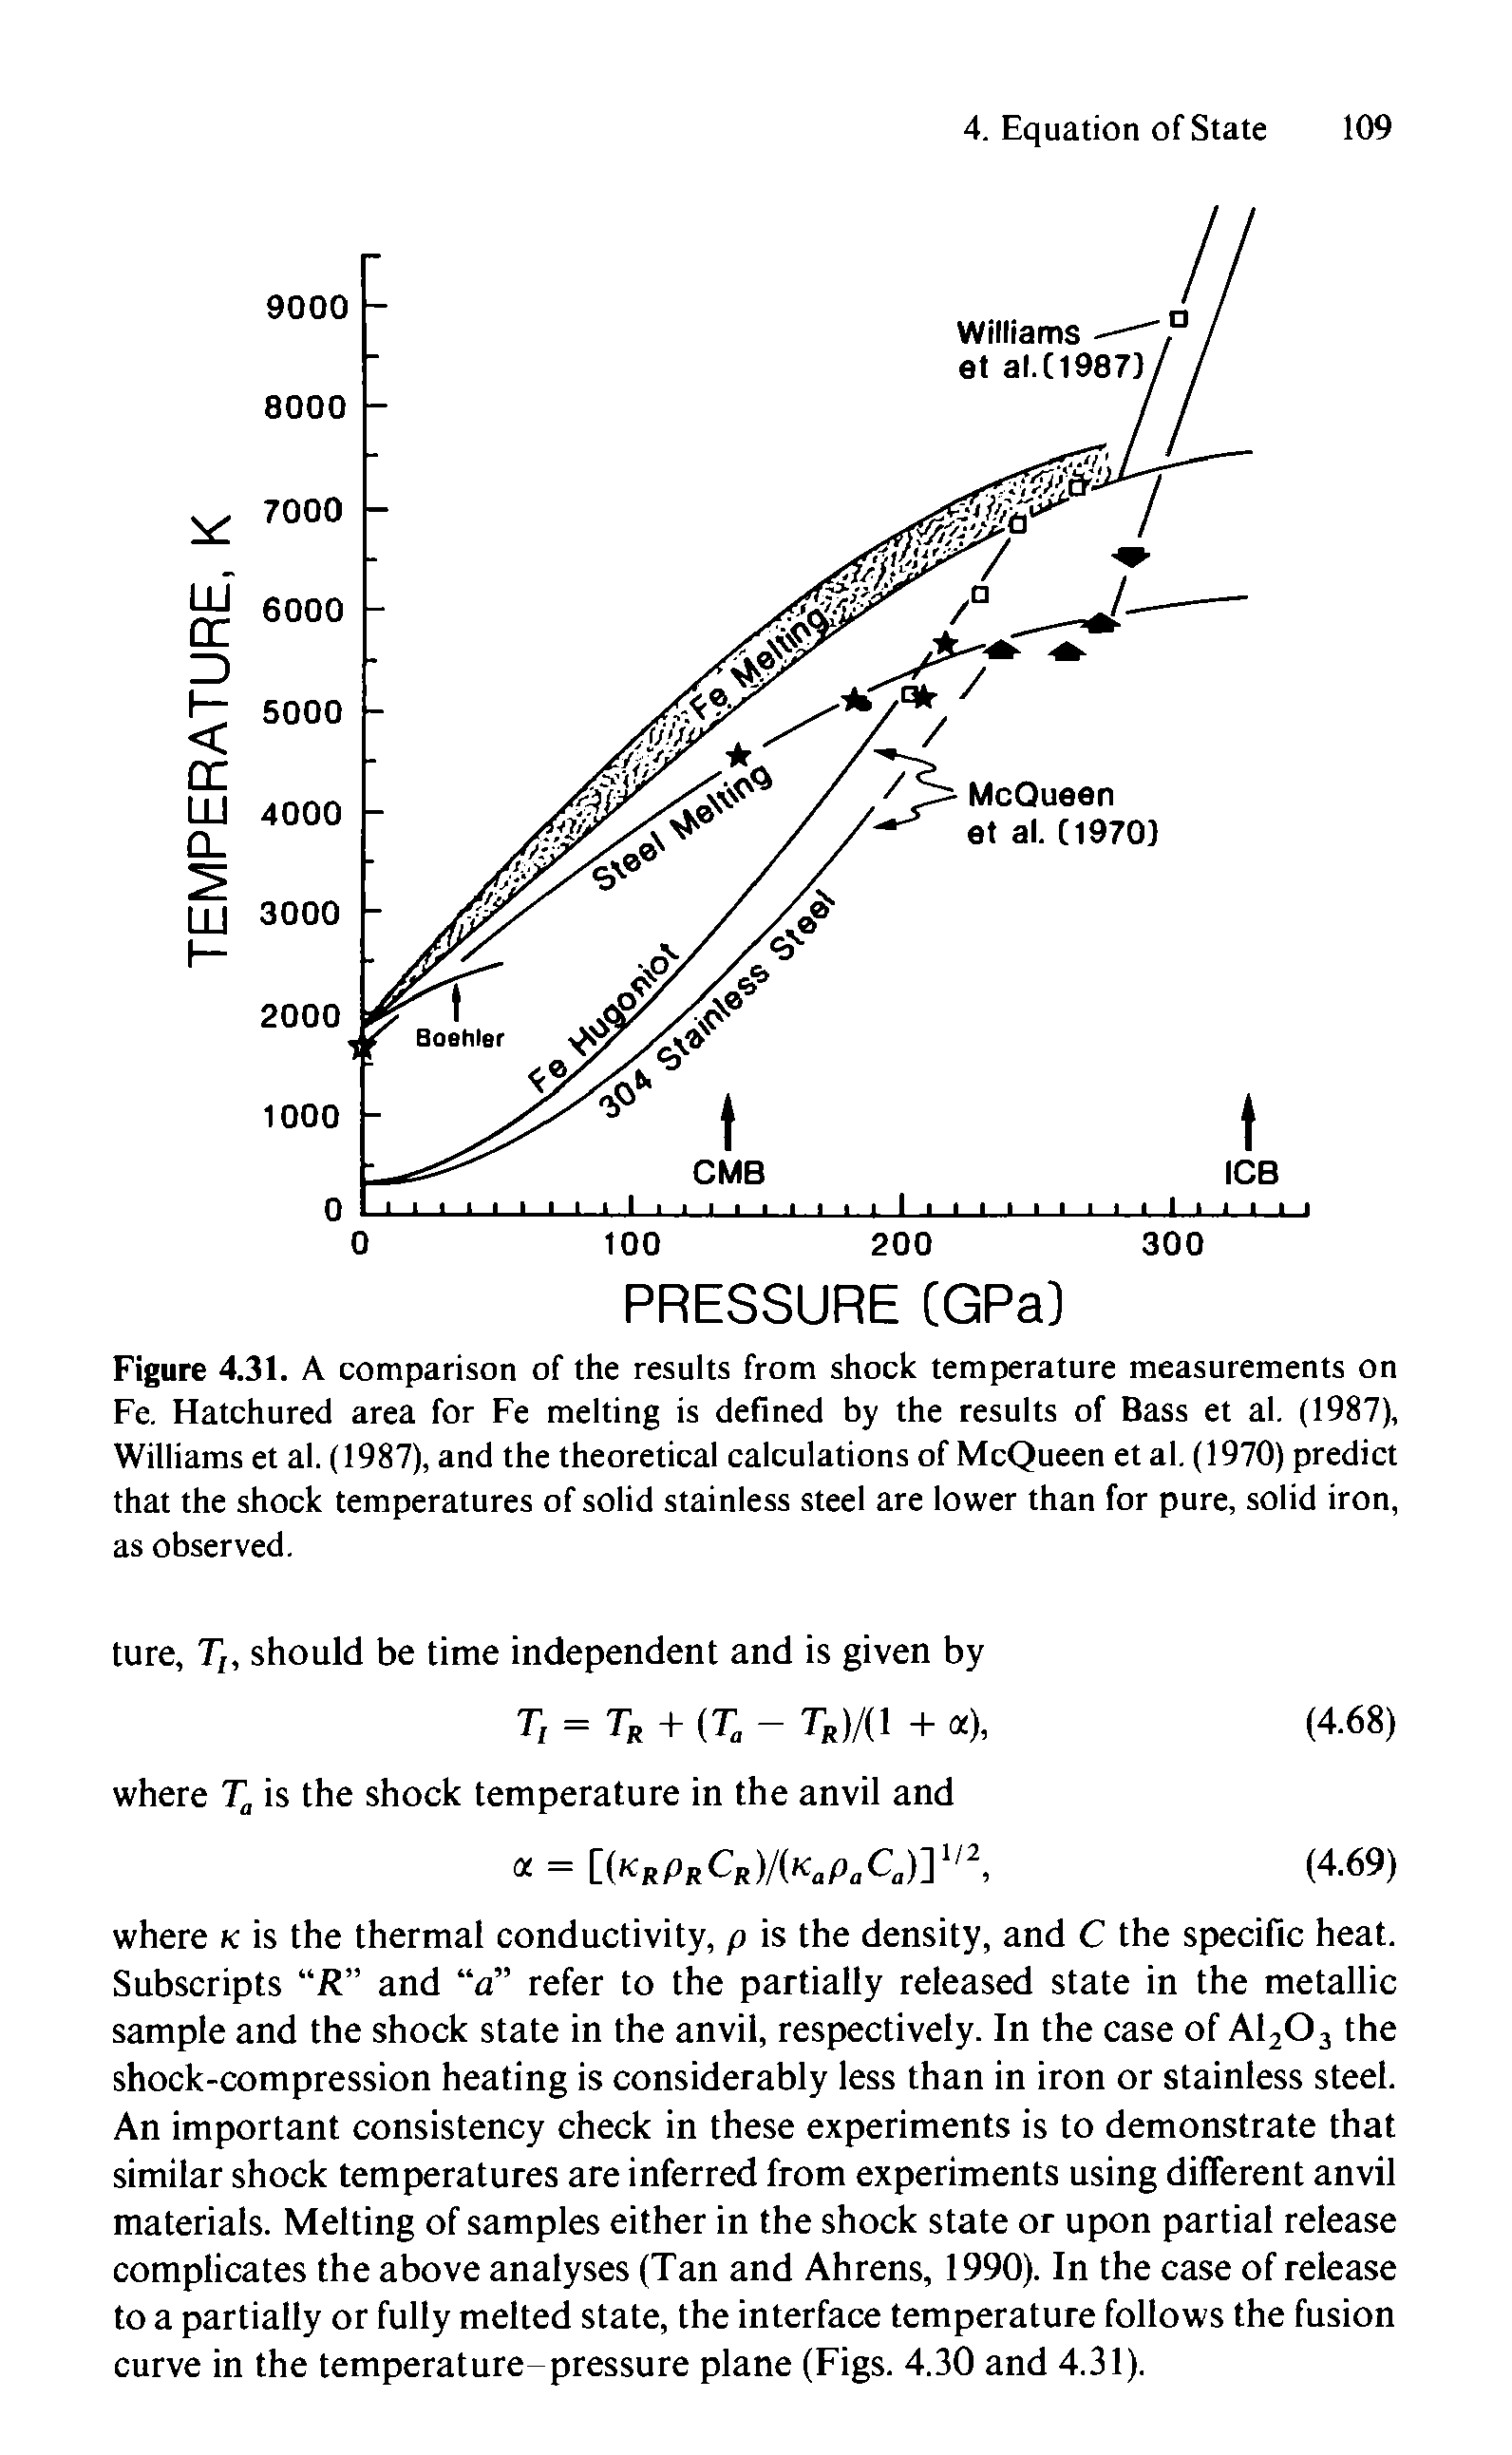 Figure 4.31. A comparison of the results from shock temperature measurements on Fe. Hatchured area for Fe melting is defined by the results of Bass et al. (1987), Williams et al. (1987), and the theoretical calculations of McQueen et al. (1970) predict that the shock temperatures of solid stainless steel are lower than for pure, solid iron, as observed.